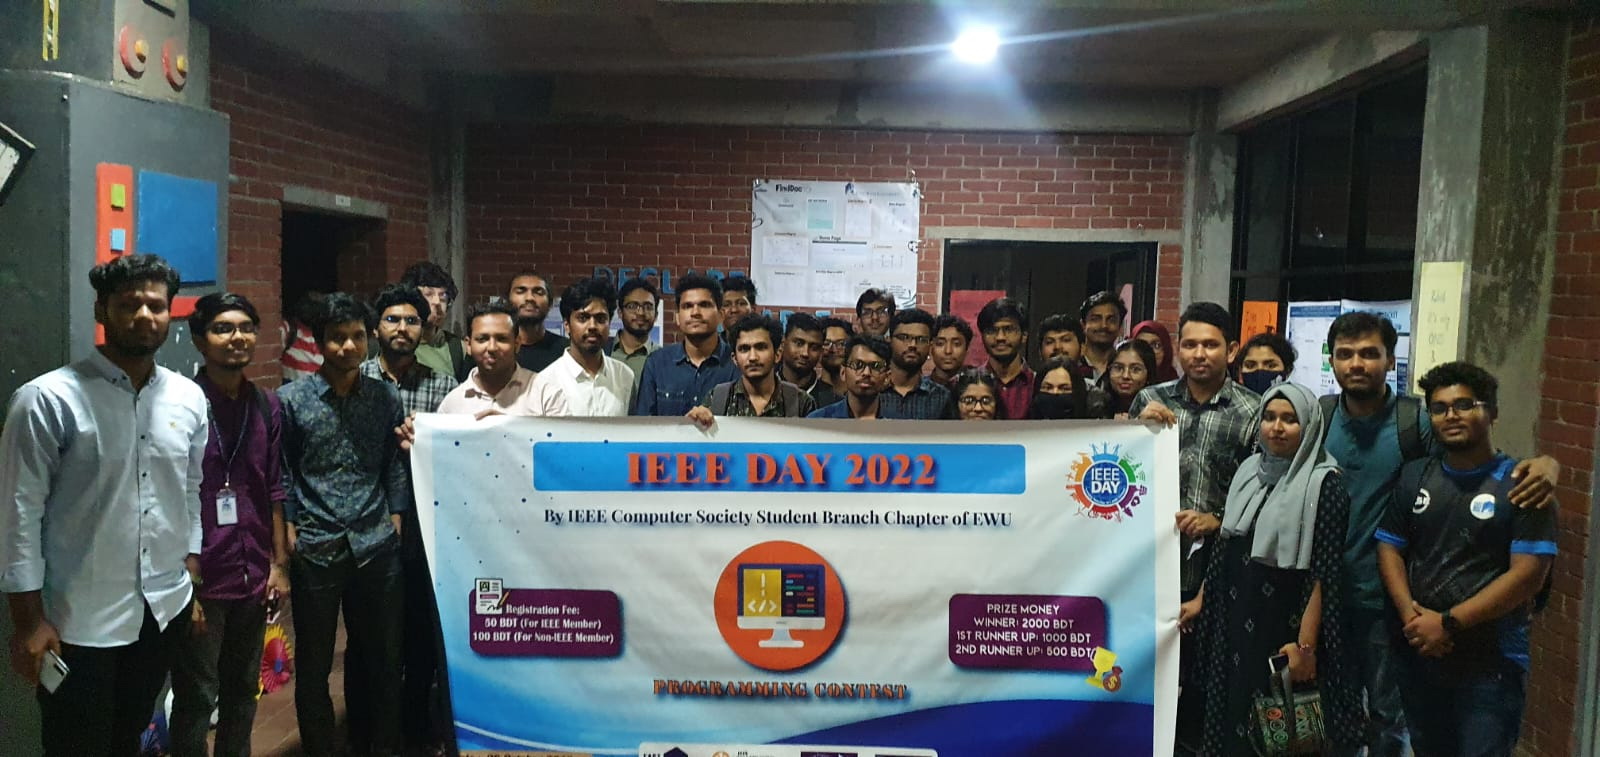 IEEE DAY 2022 organized by IEEE East West University Student Branch